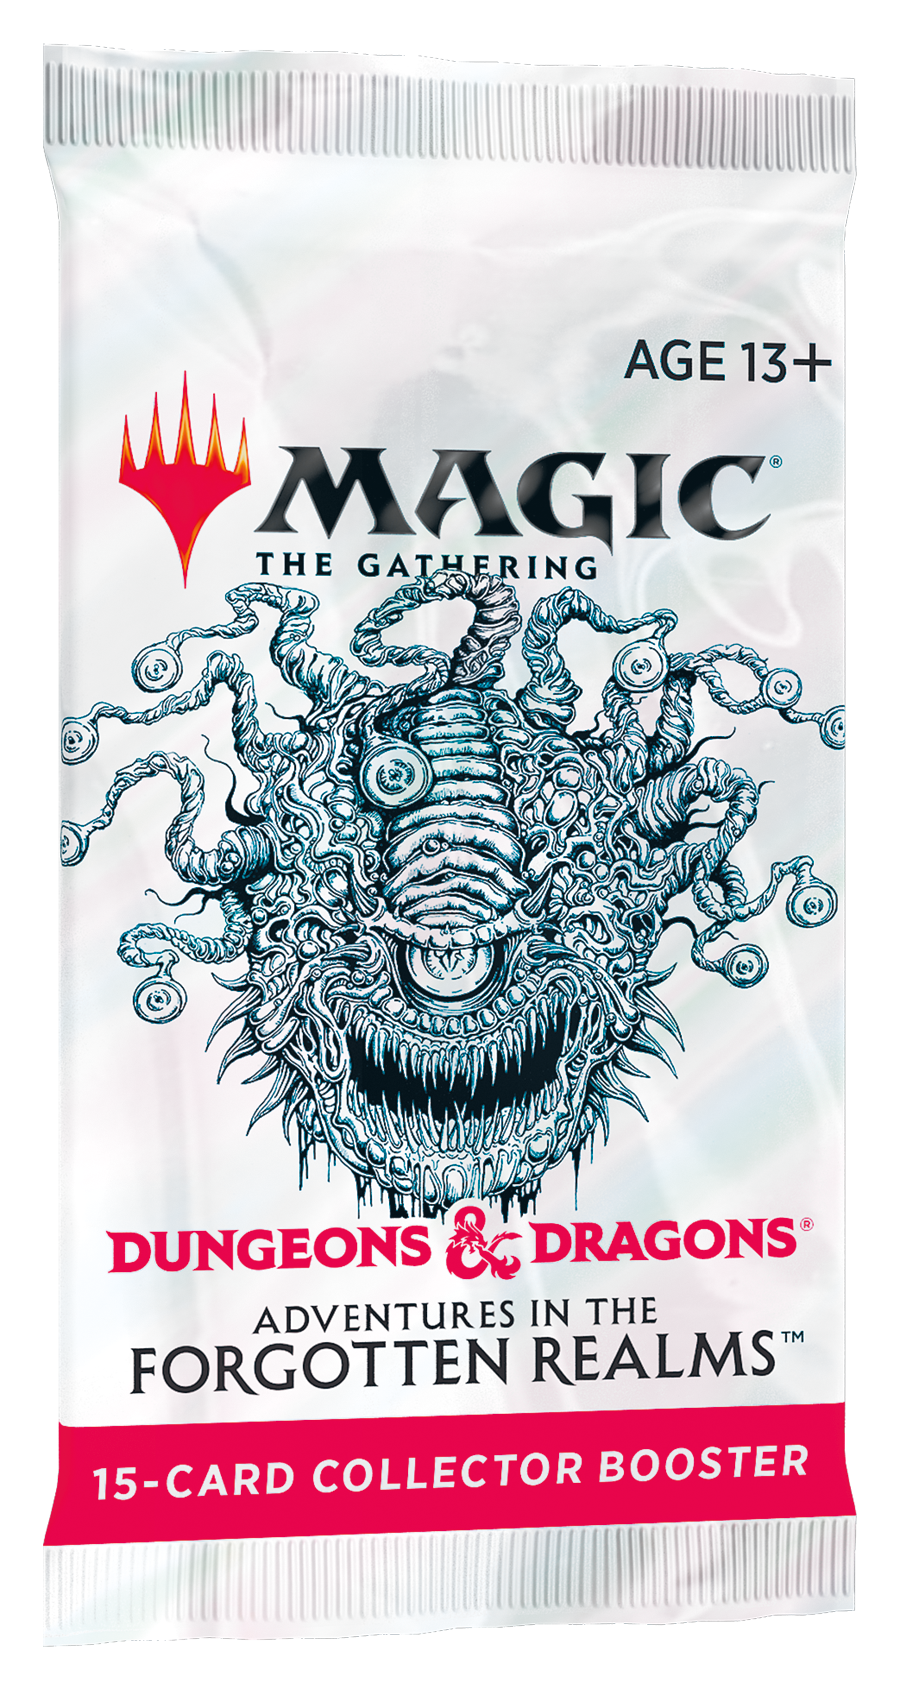 Boite de Collector Booster Dungeons & Dragons : Forgotten Realms - Adventures in the Forgotten Realms